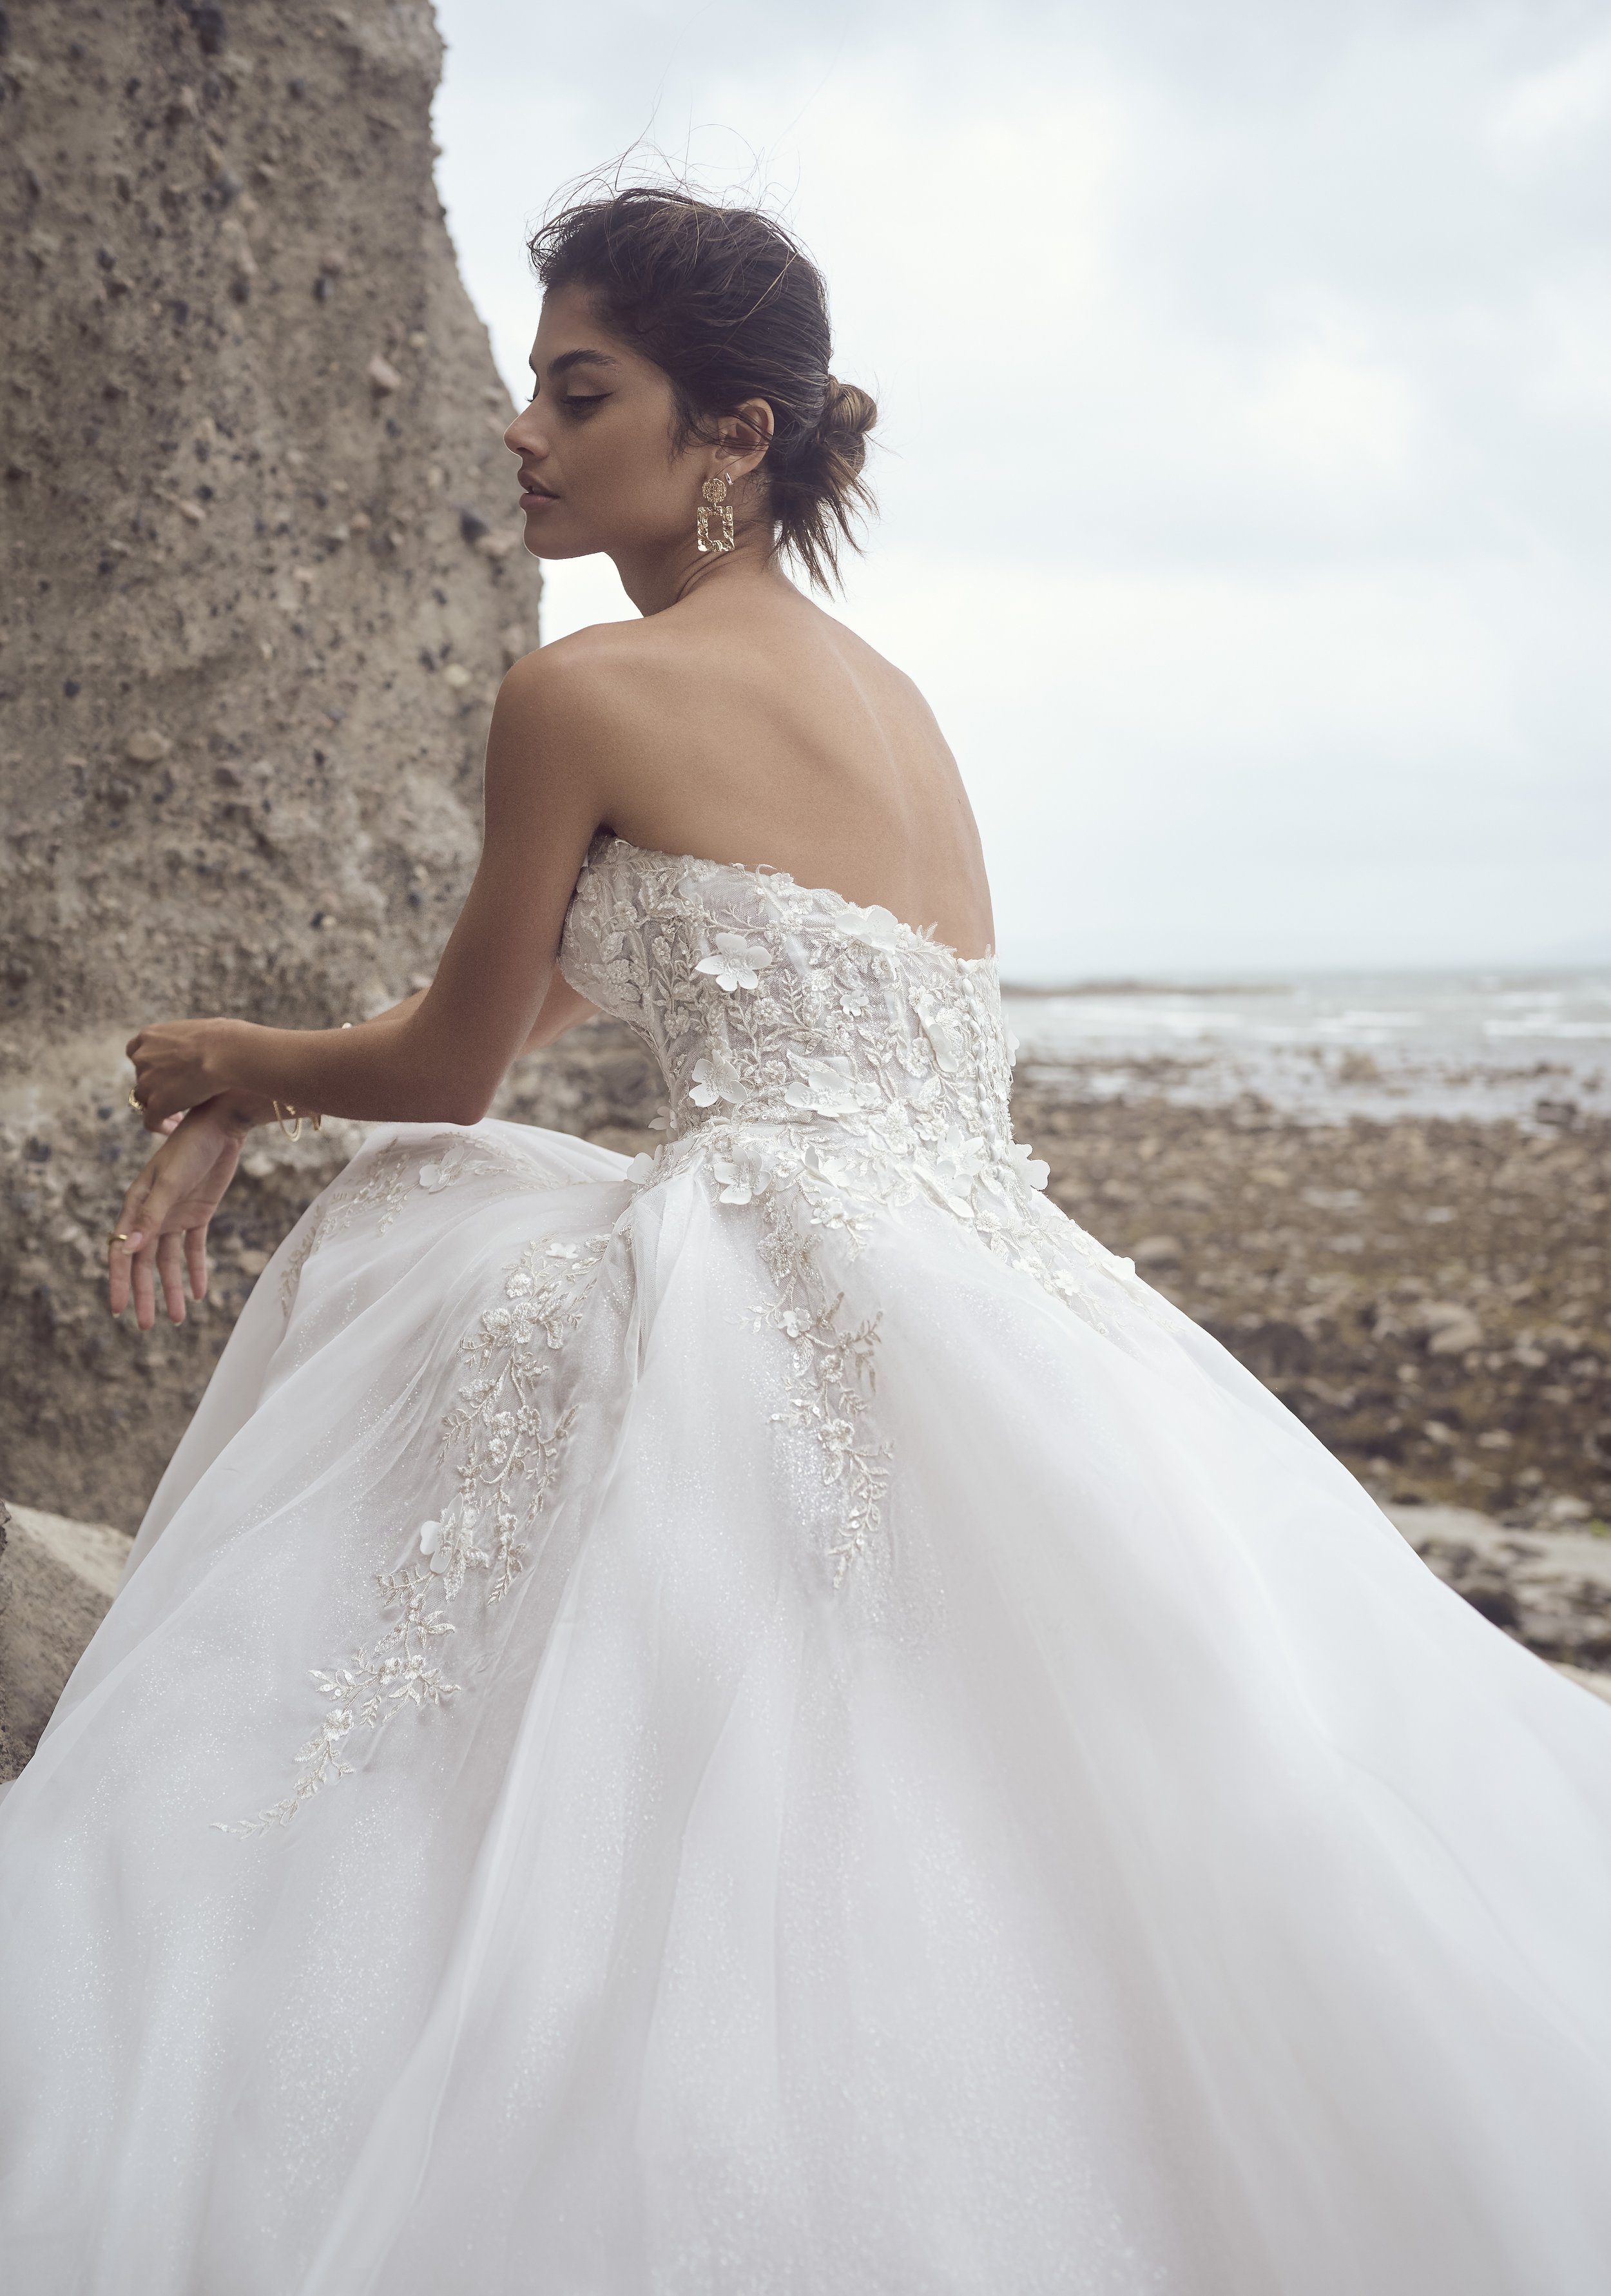 The 10 Best Wedding Dresses in Mississippi - WeddingWire